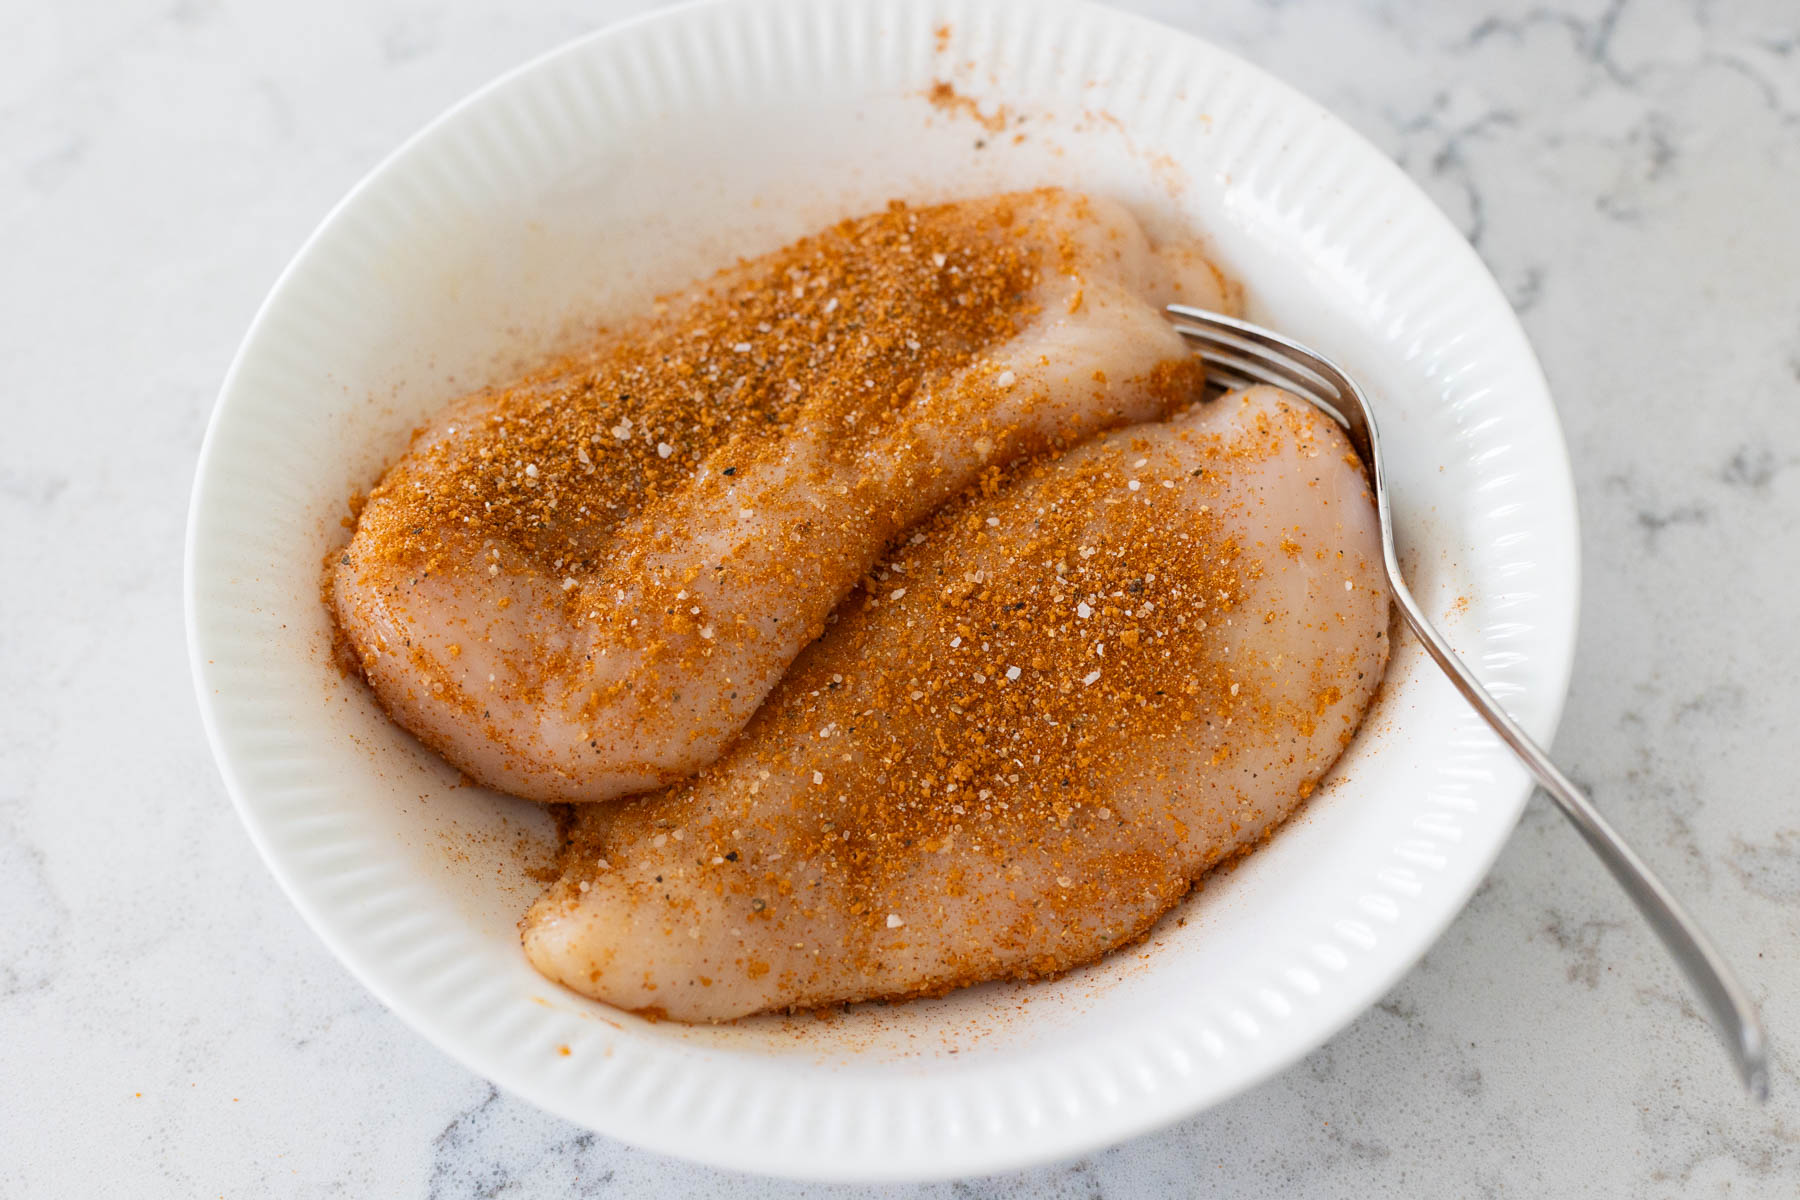 The chicken breasts in the mixing bowl have been coated with the dry rub.